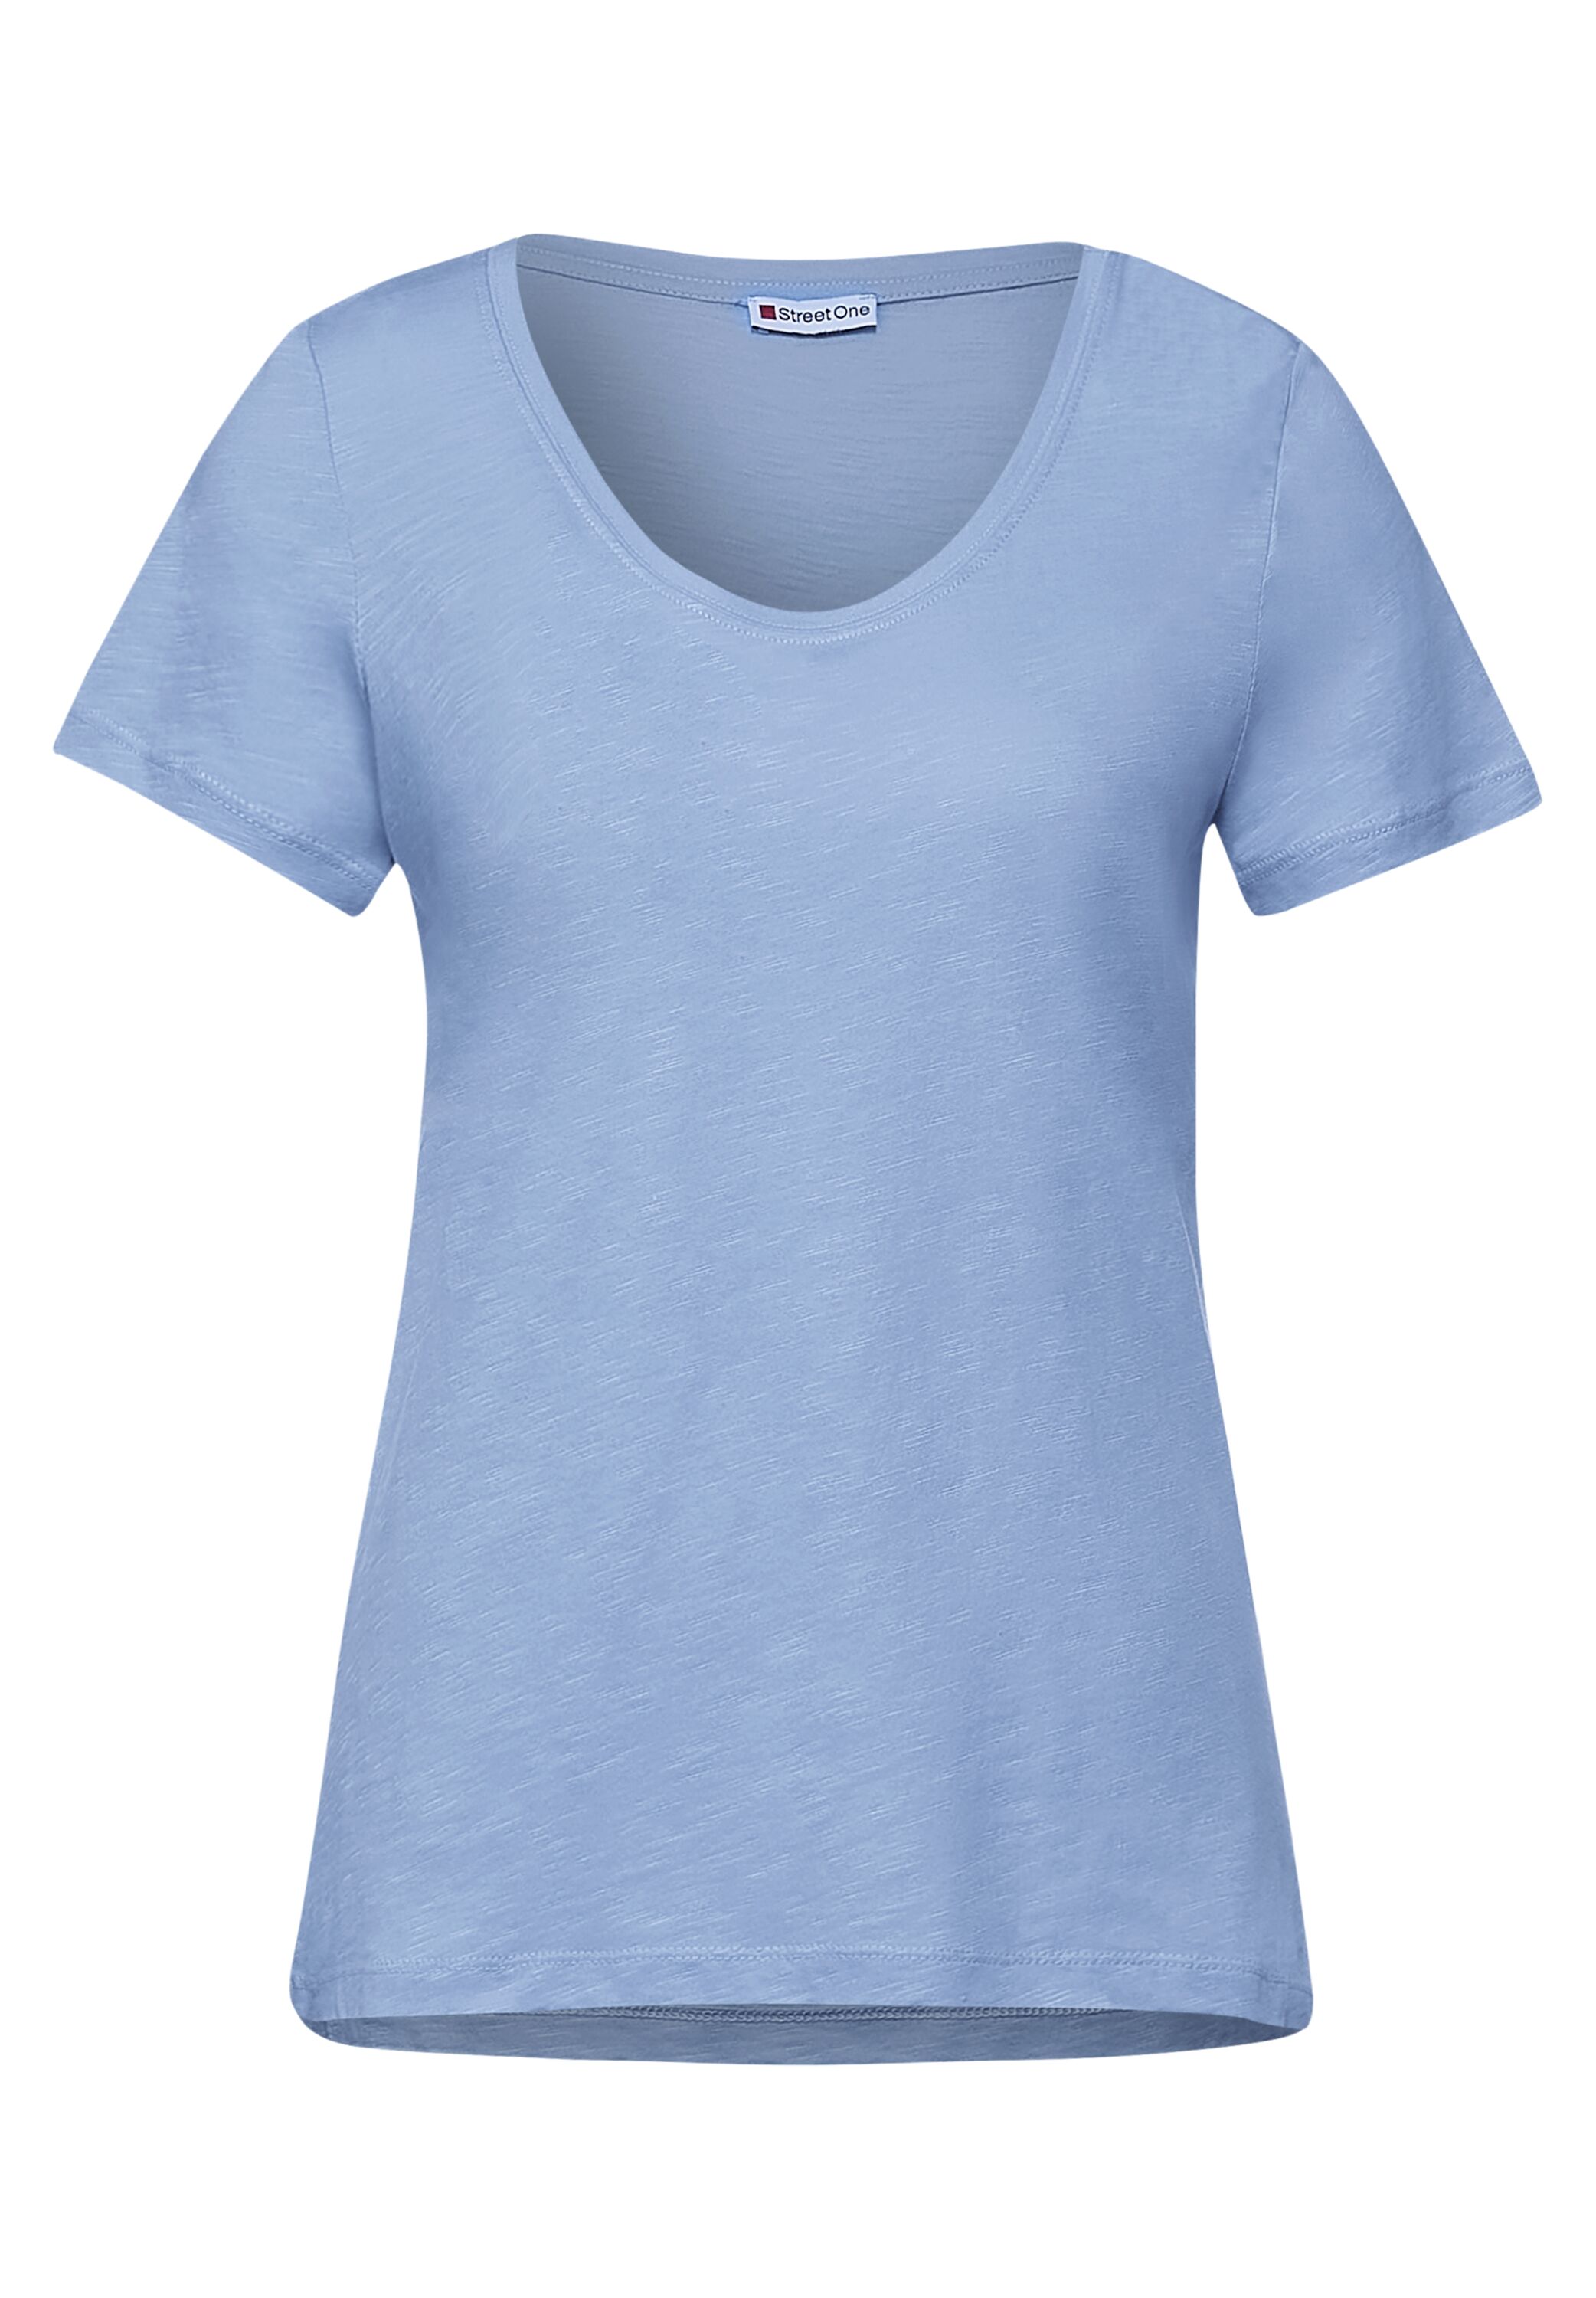 Street One T-Shirt Gerda in Mid Sunny Blue A316300-13032 - CONCEPT Mode